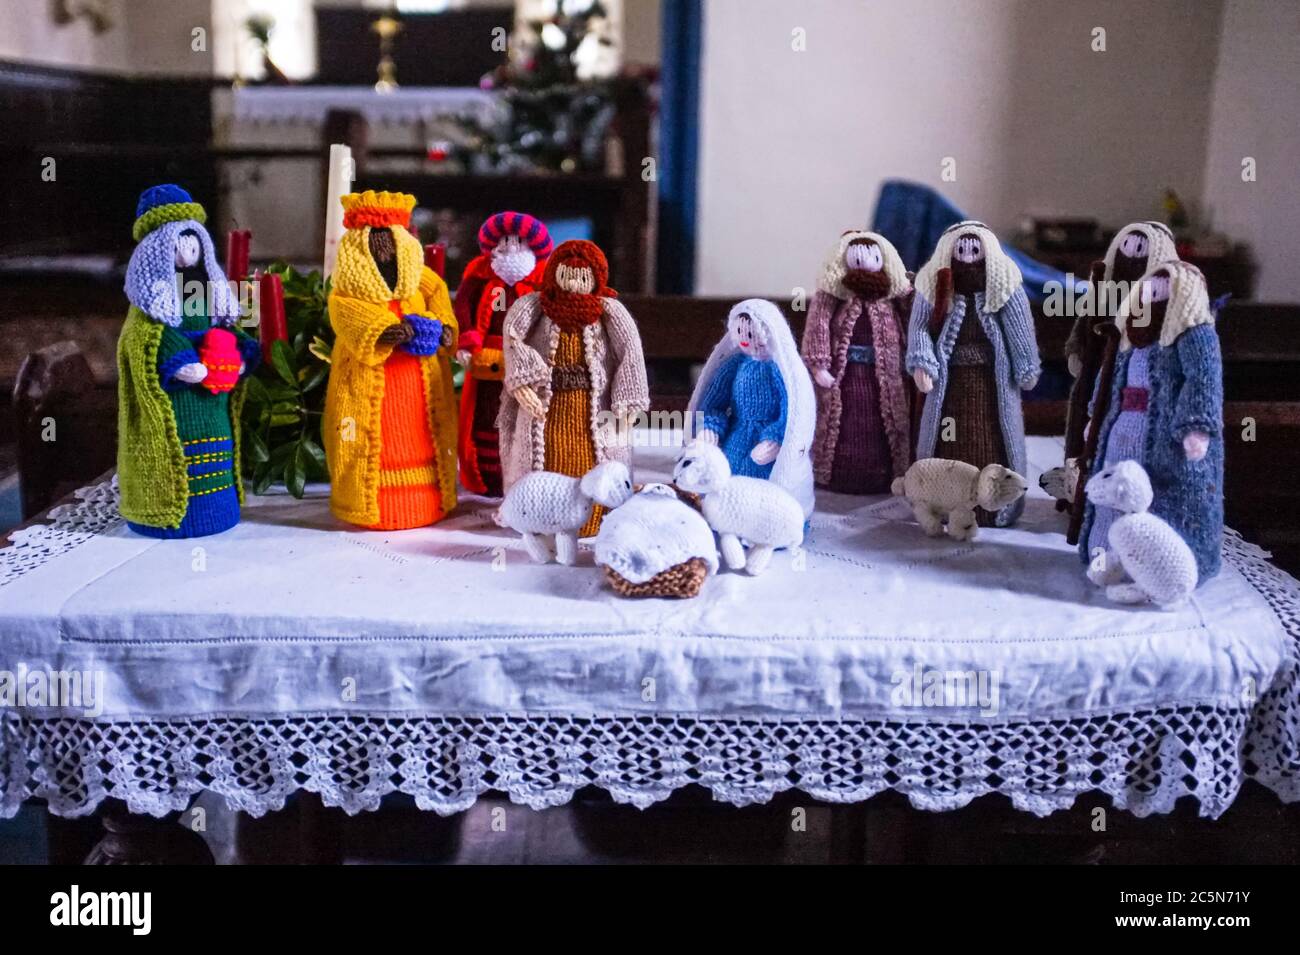 Knitted figurines depict a Christmas nativity scene on a covered table. Stock Photo